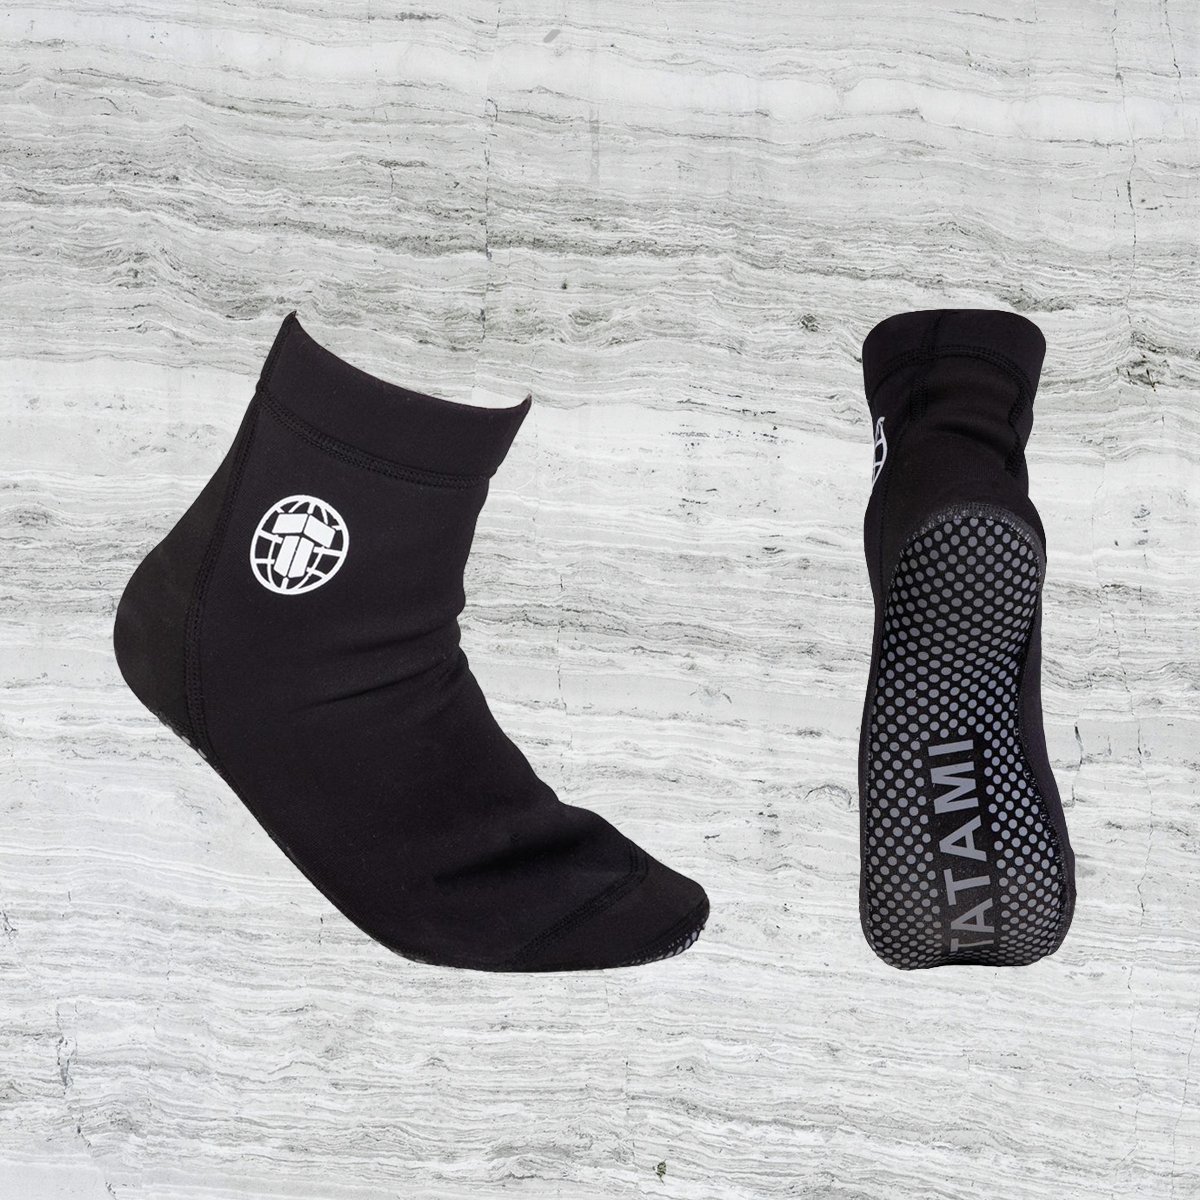 Tatami Fightwear on X: New in our accessories range - grappling socks!  Designed to maintain and improve your strength and flexibility on the mat,  our #TatamiFightwear grappling socks are made from a